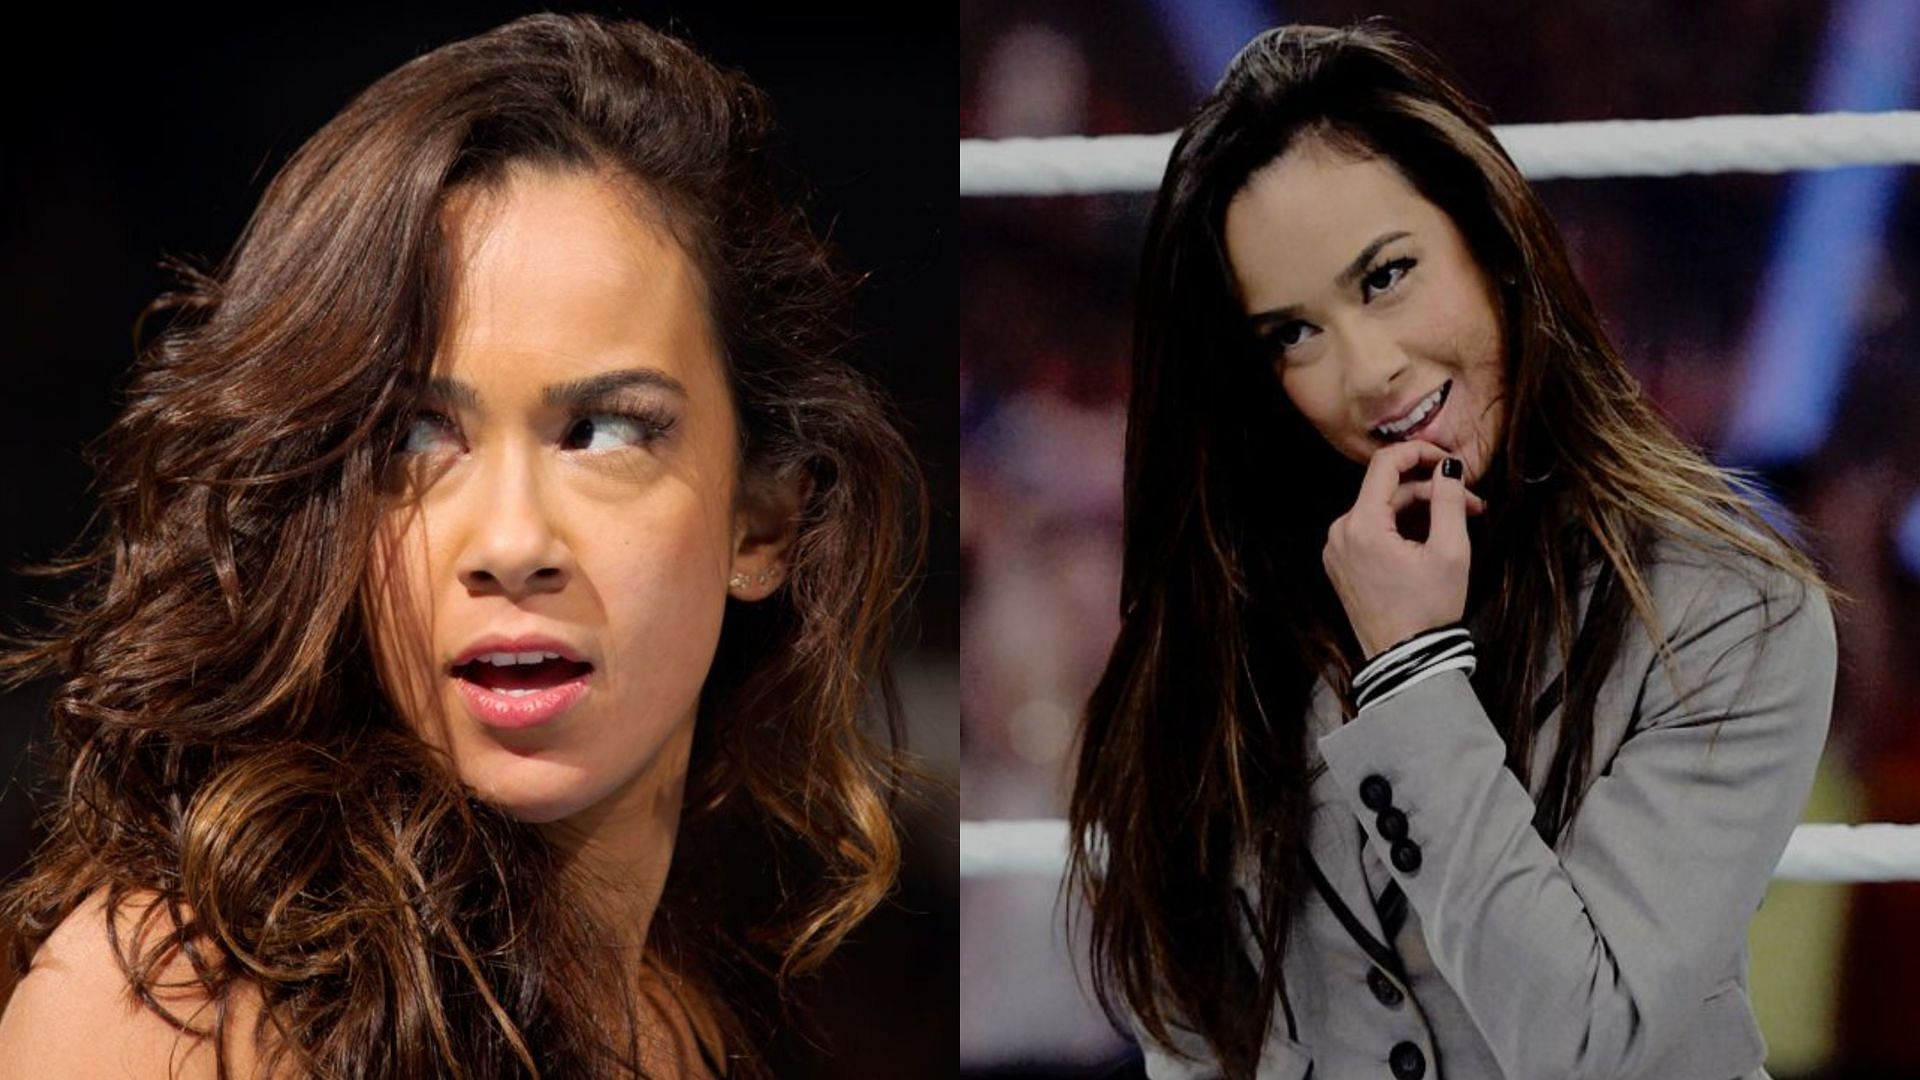 AJ Lee is currently married to CM Punk